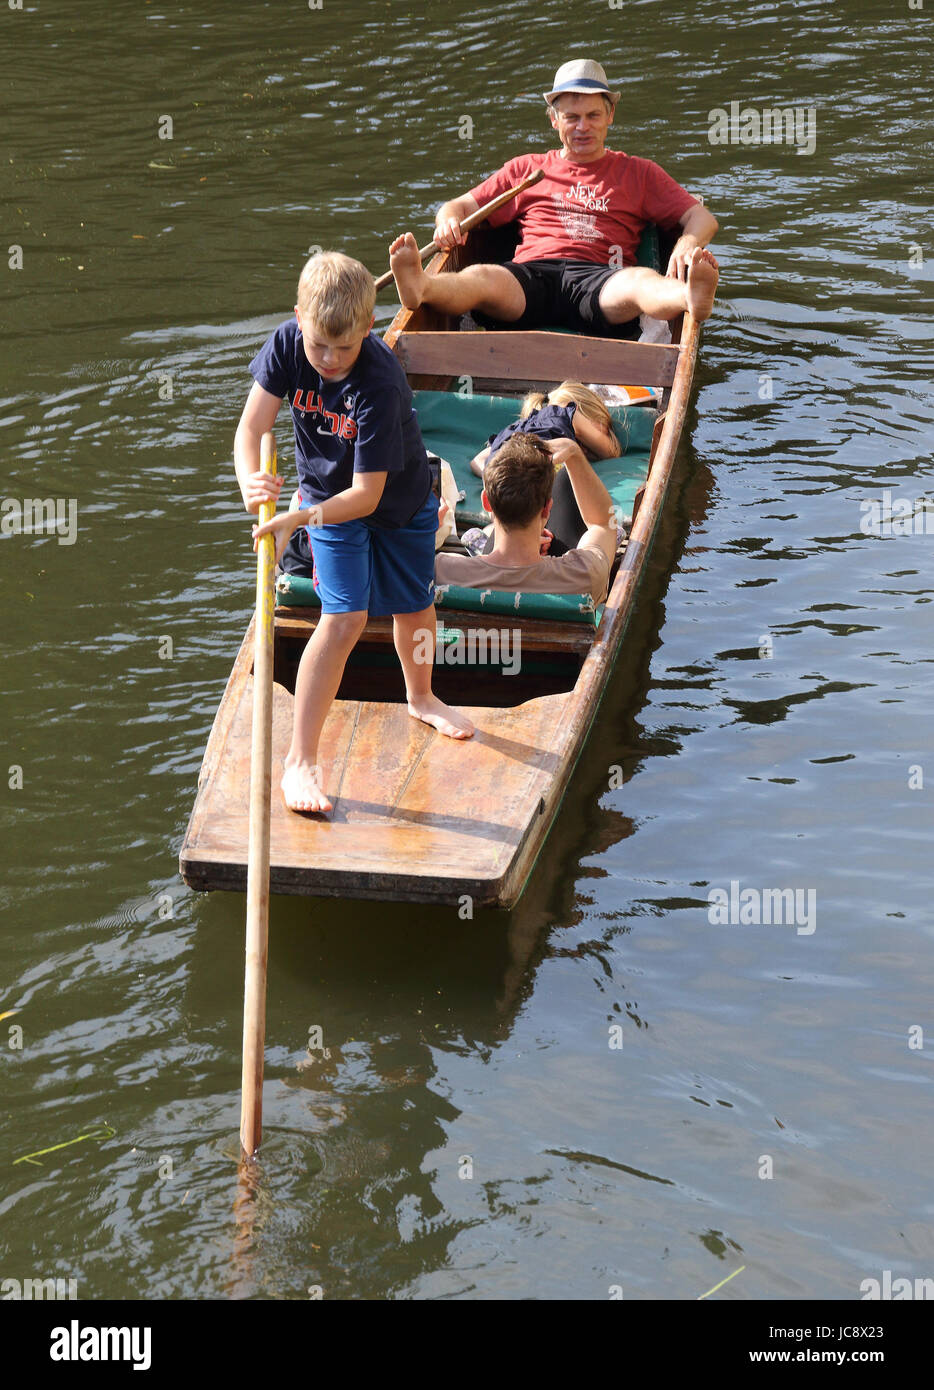 Cambridge, UK. 14th June, 2017. Cambridge, UK - People enjoy a warm summer evening punting on the River Cam through Cambridge, on Wednesday June 14th 2017 Credit: KEITH MAYHEW/Alamy Live News Stock Photo